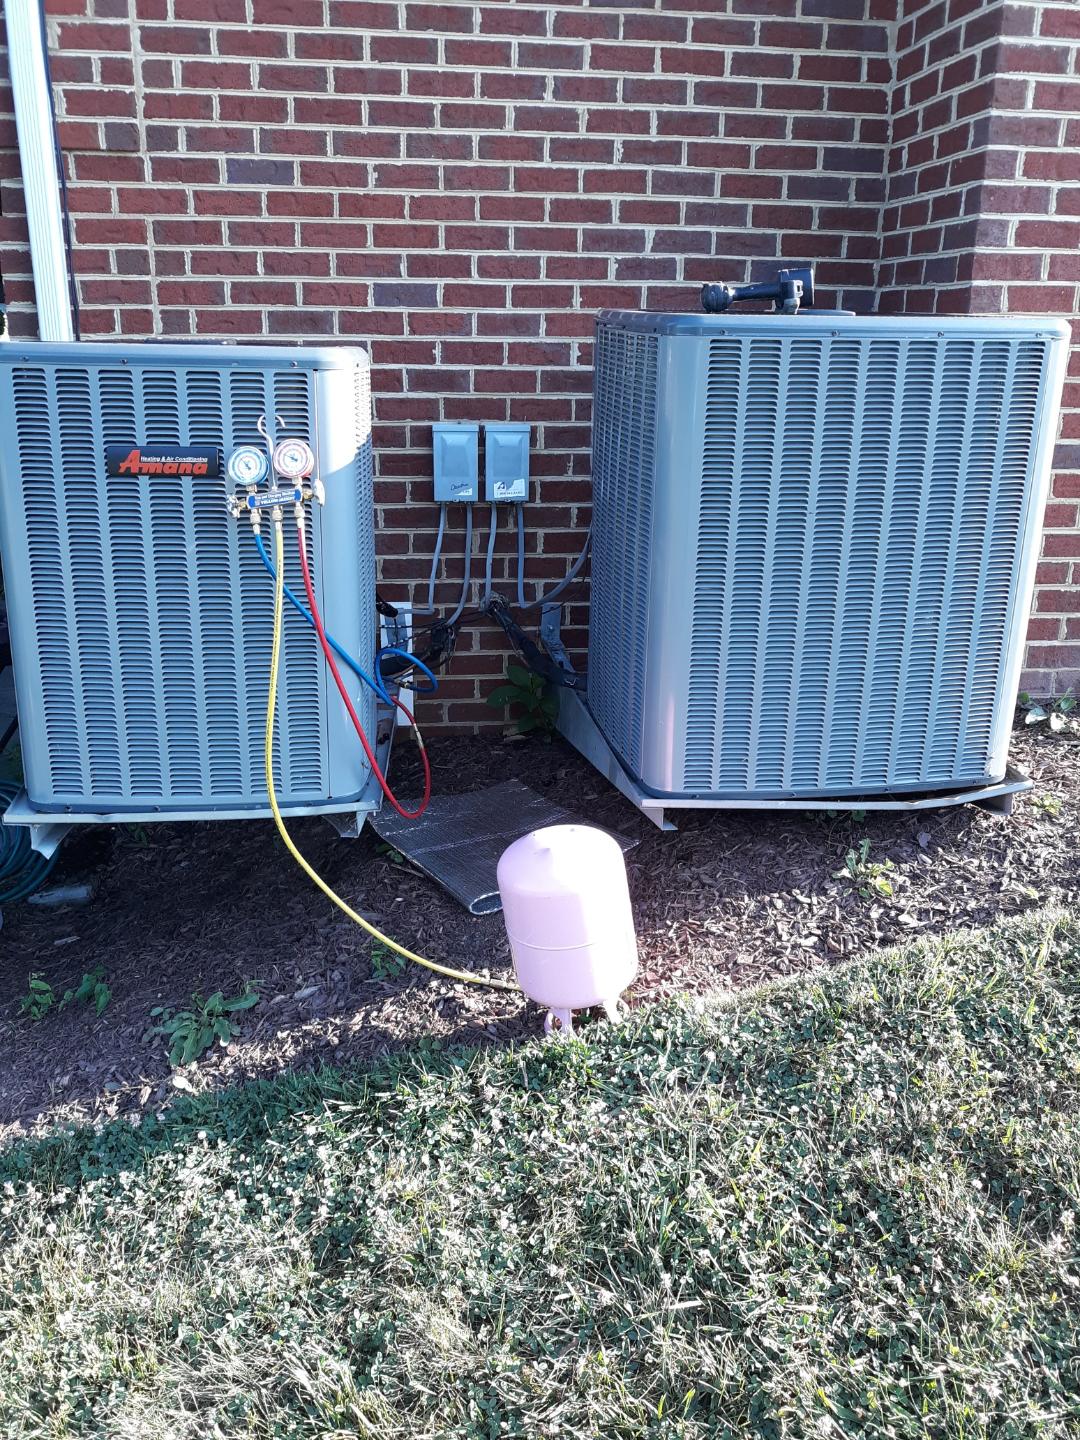 RS Gregory Heating and Air Conditioning Photo